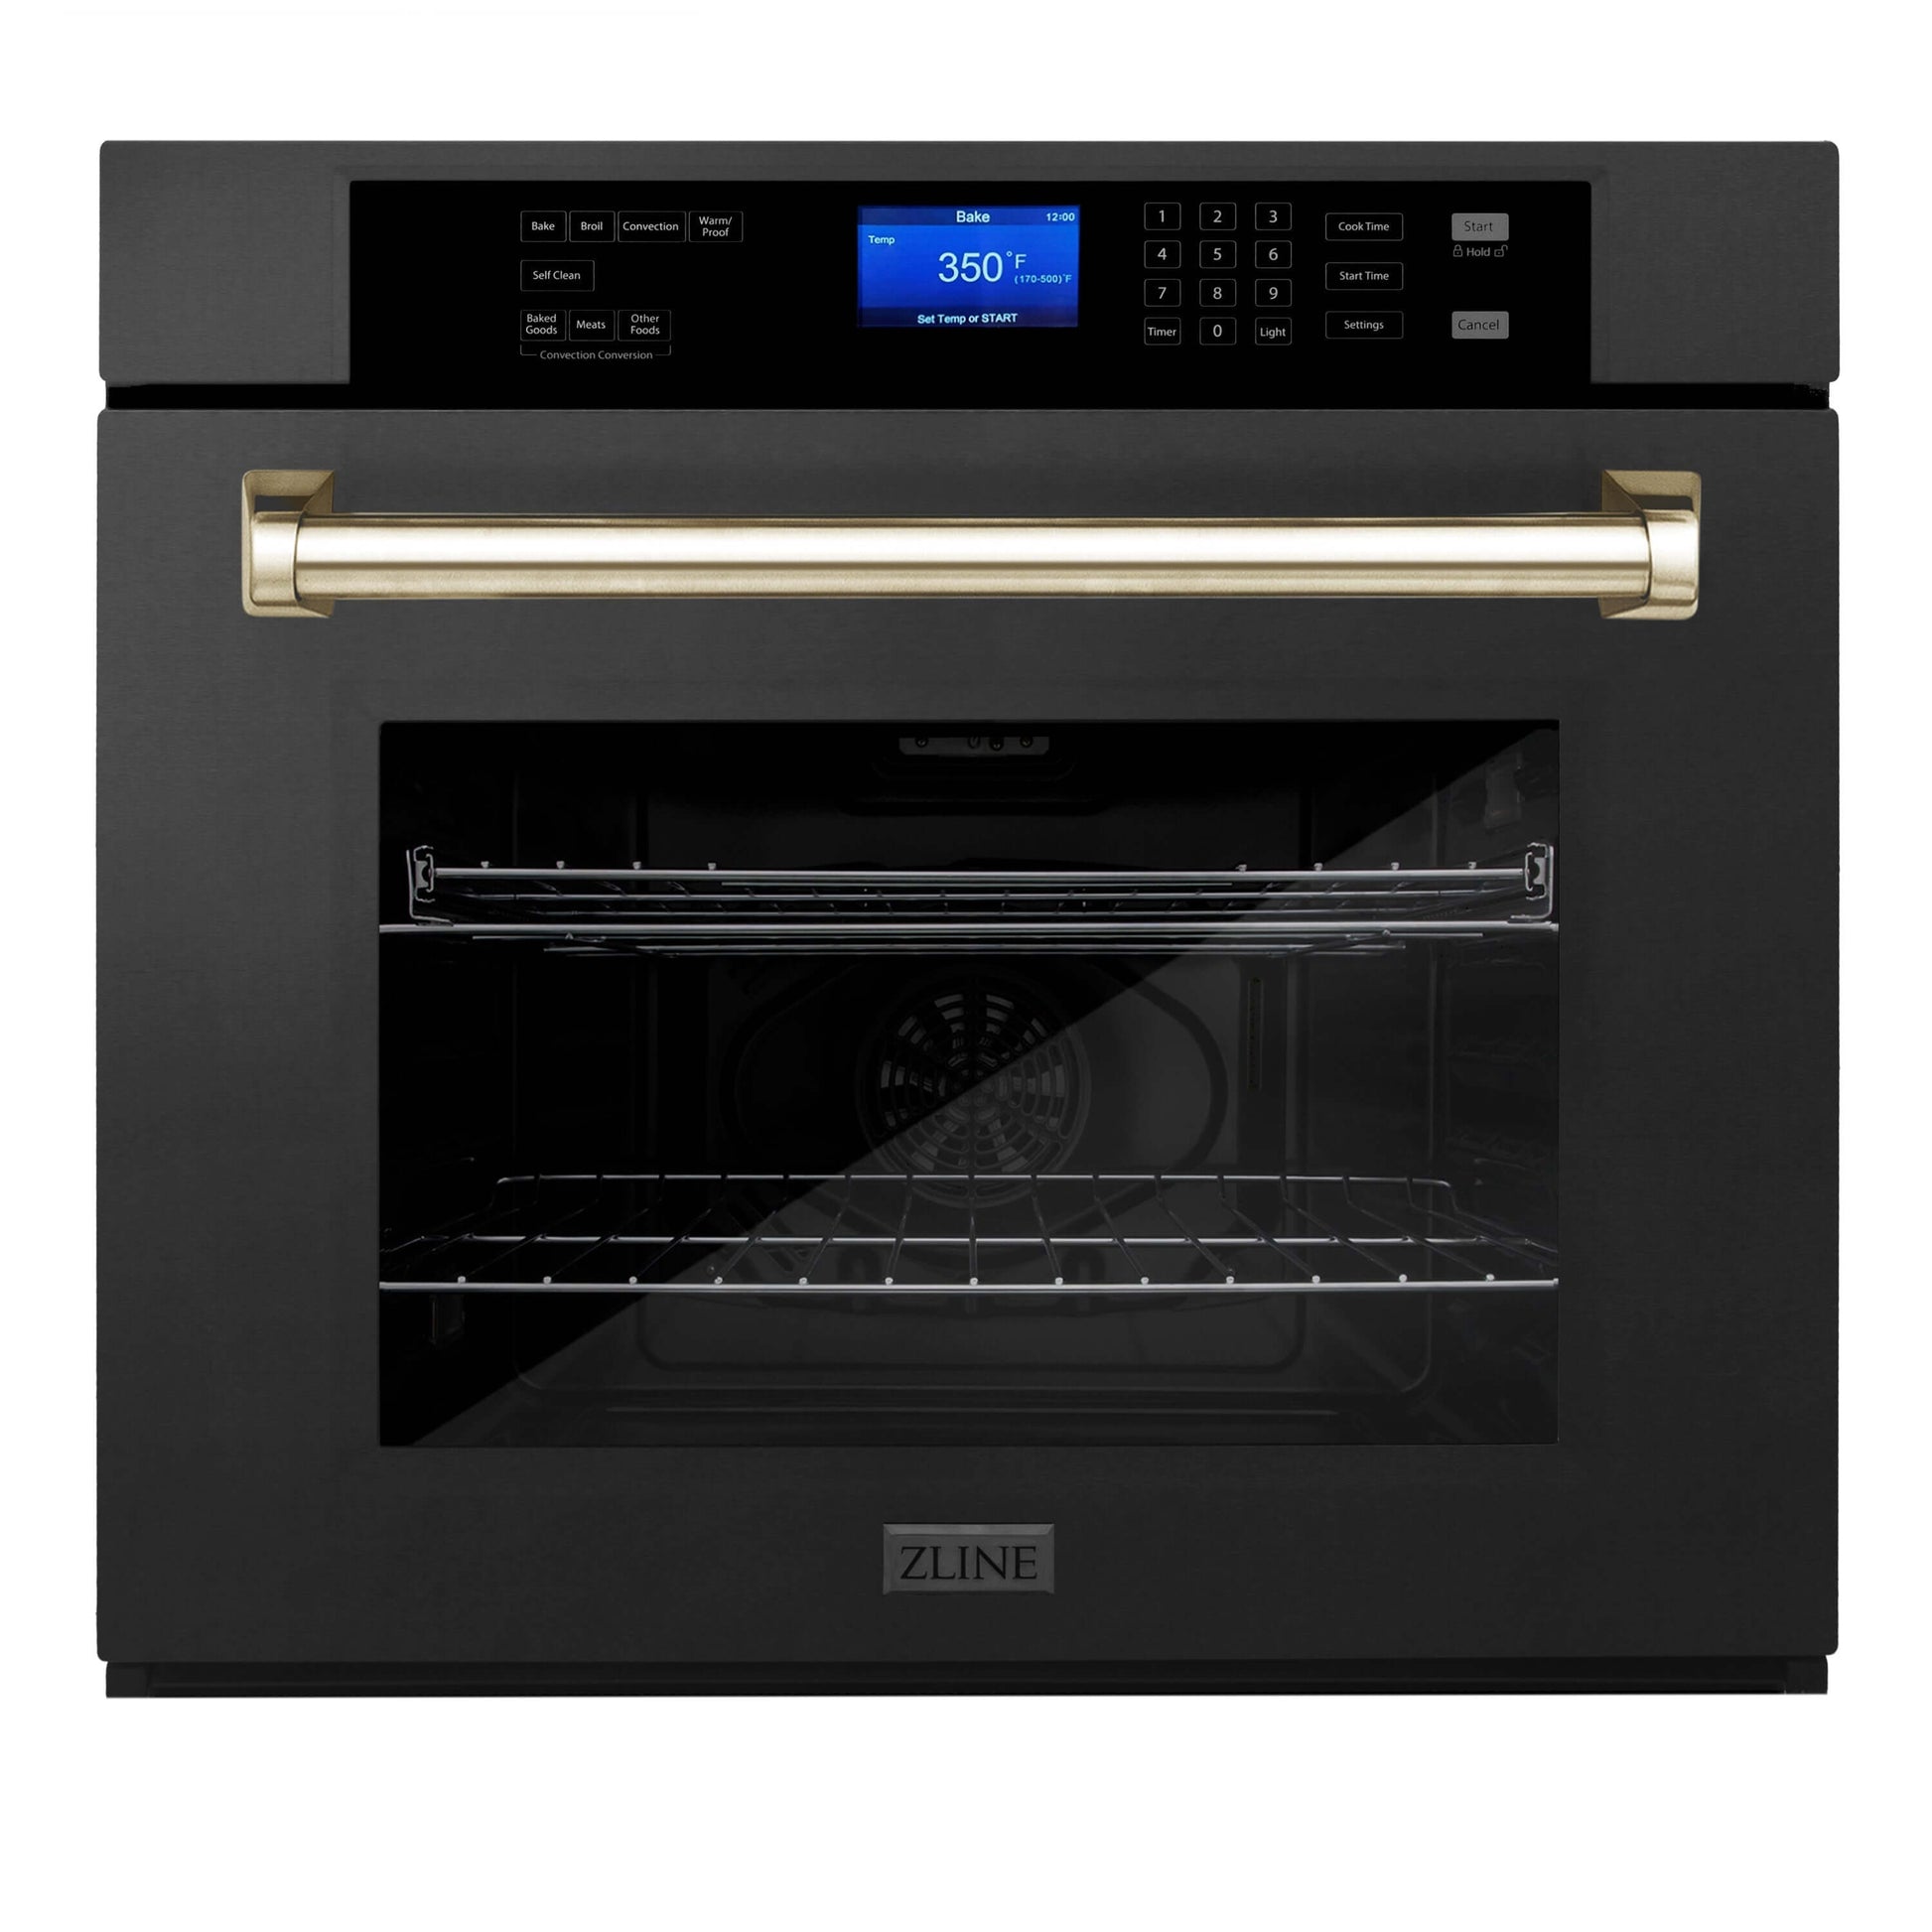 ZLINE 30" Autograph Edition Single Wall Oven - Black Stainless Steel with Accents, Self Clean, True Convection